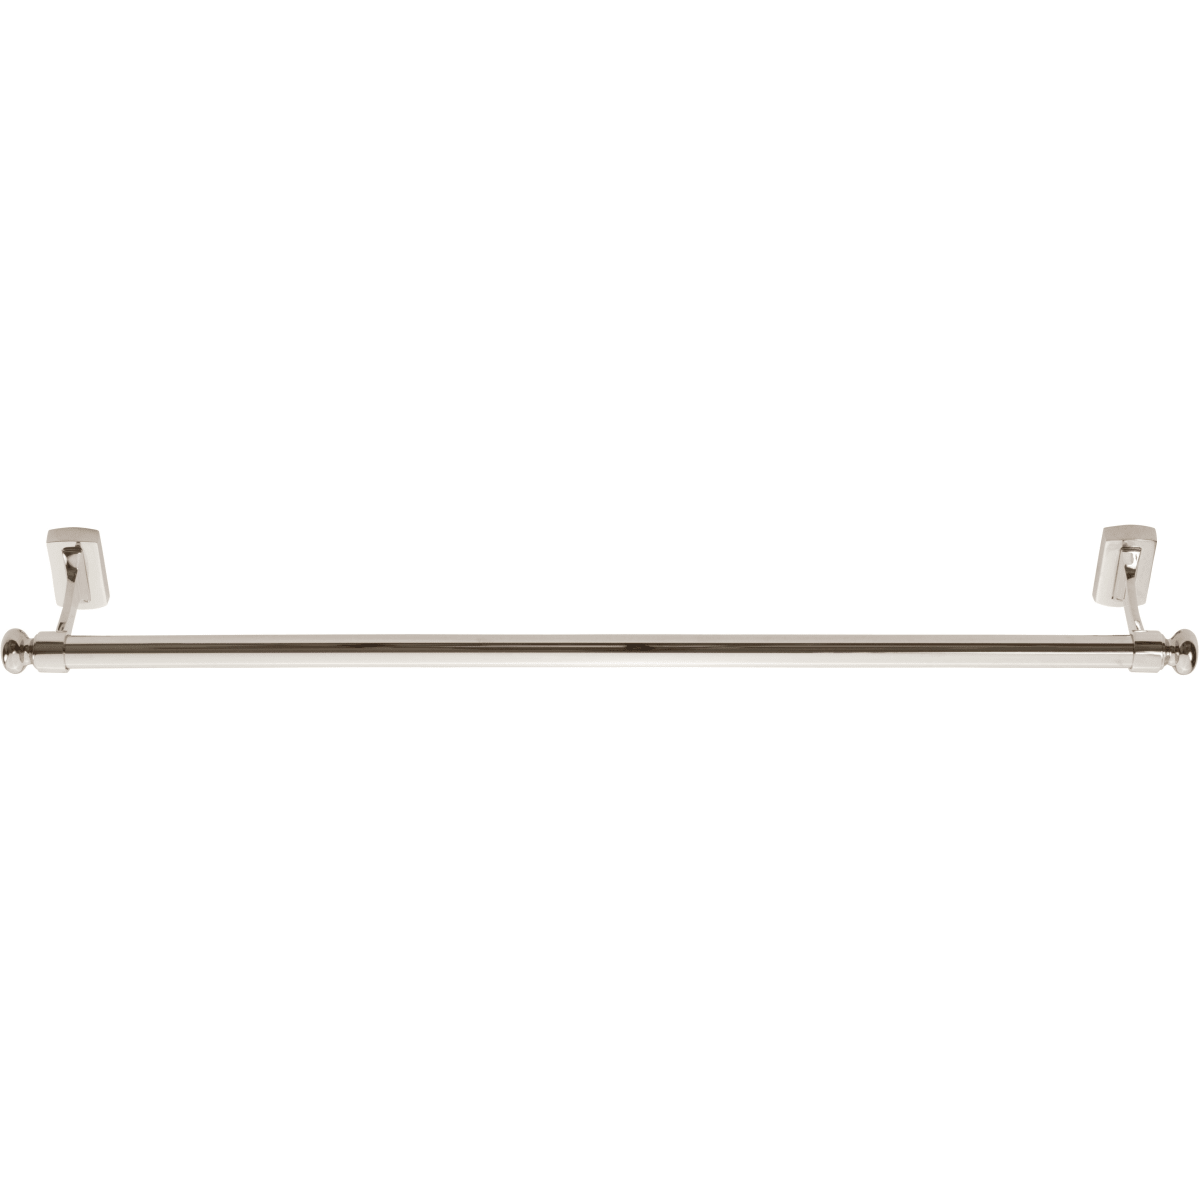 Polished Chrome Legacy Collection 18-In Towel Bar Atlas Homewares LGTB18-CH 